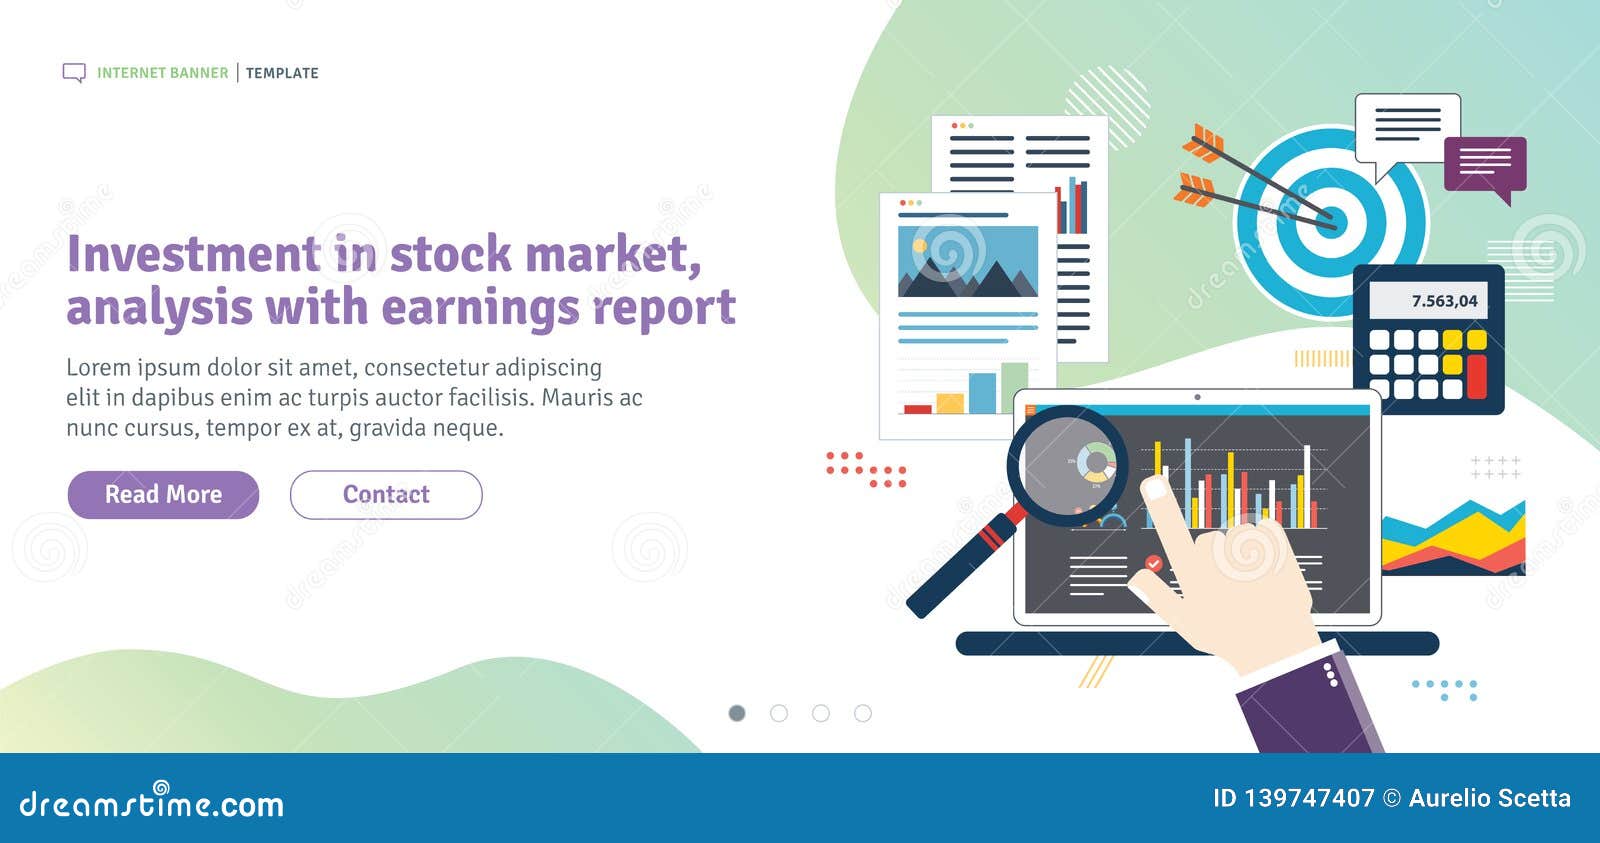 The Facts About Equity Research & Reports - Indian Stock Market Analysis - Bse Revealed